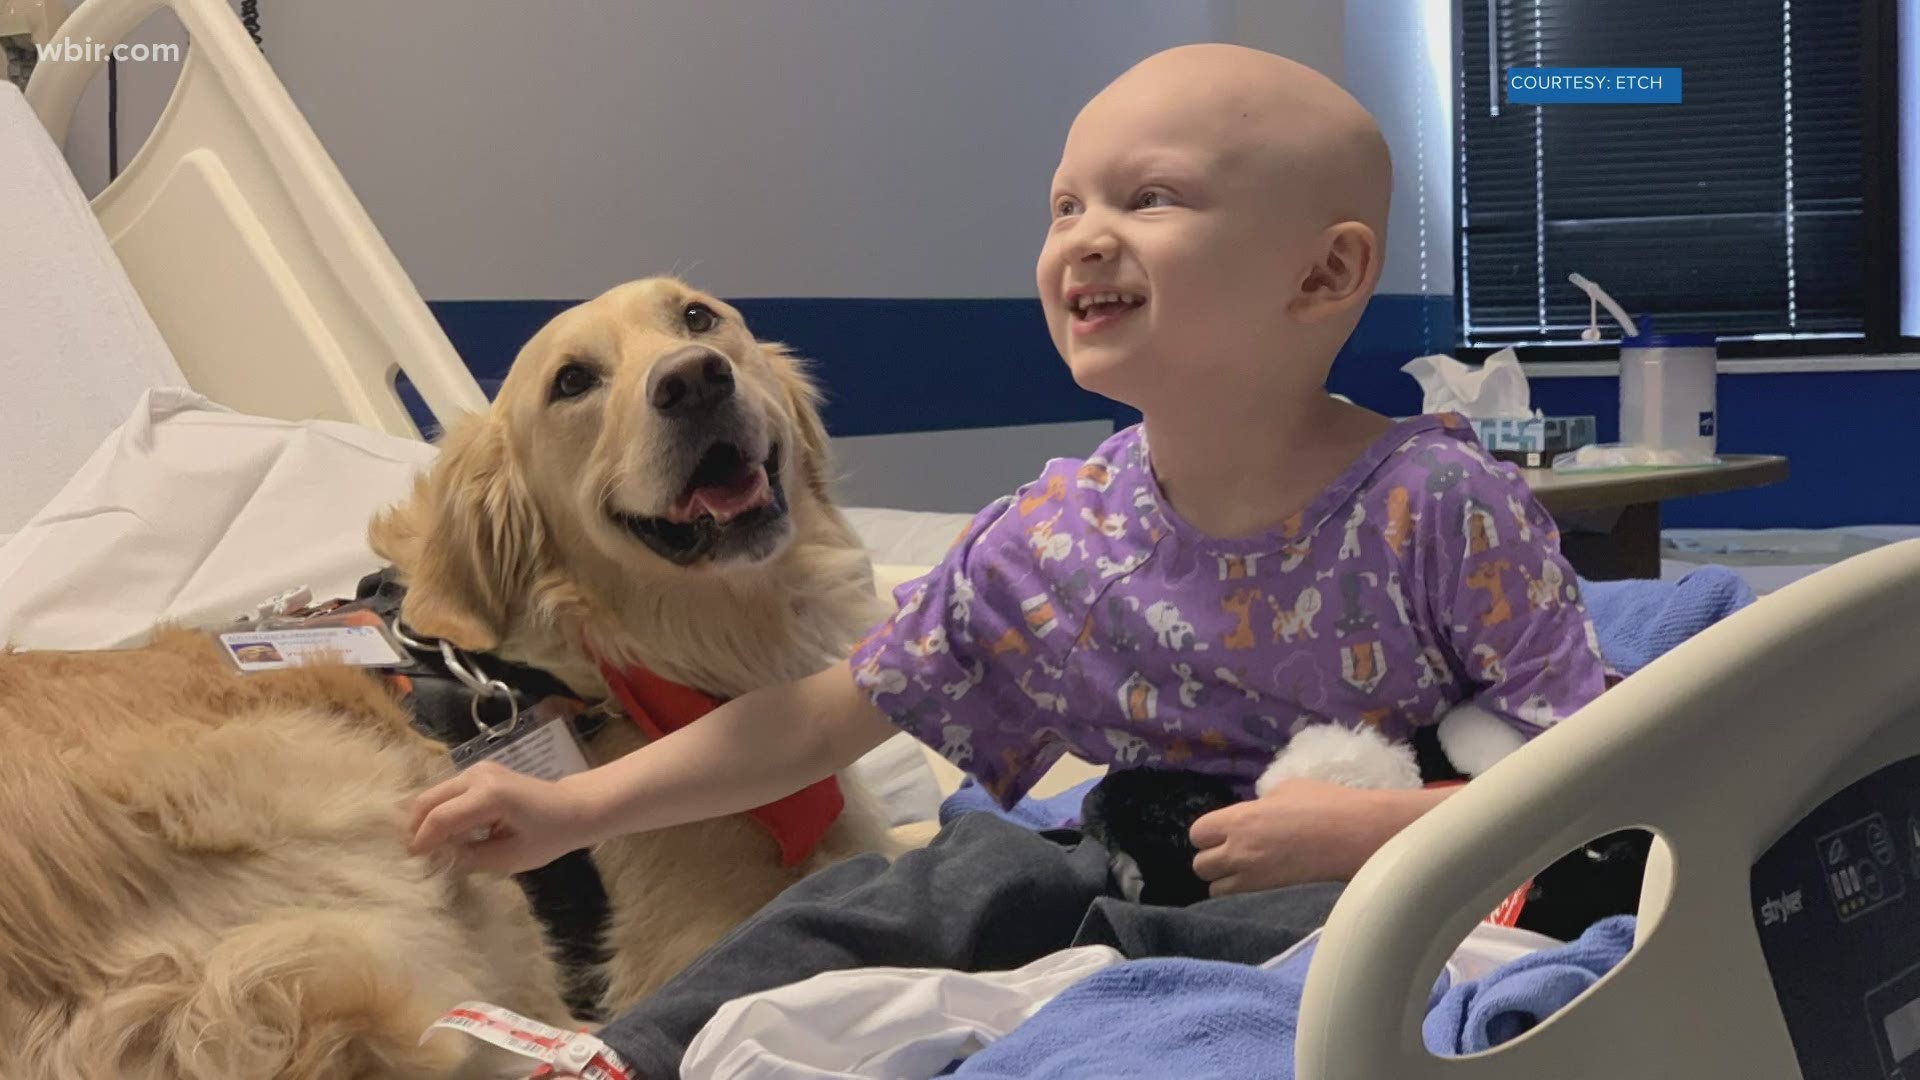 Some very special guest came back to East Tennessee Children's Hospital this week for the first time since the pandemic started to make patients smile!